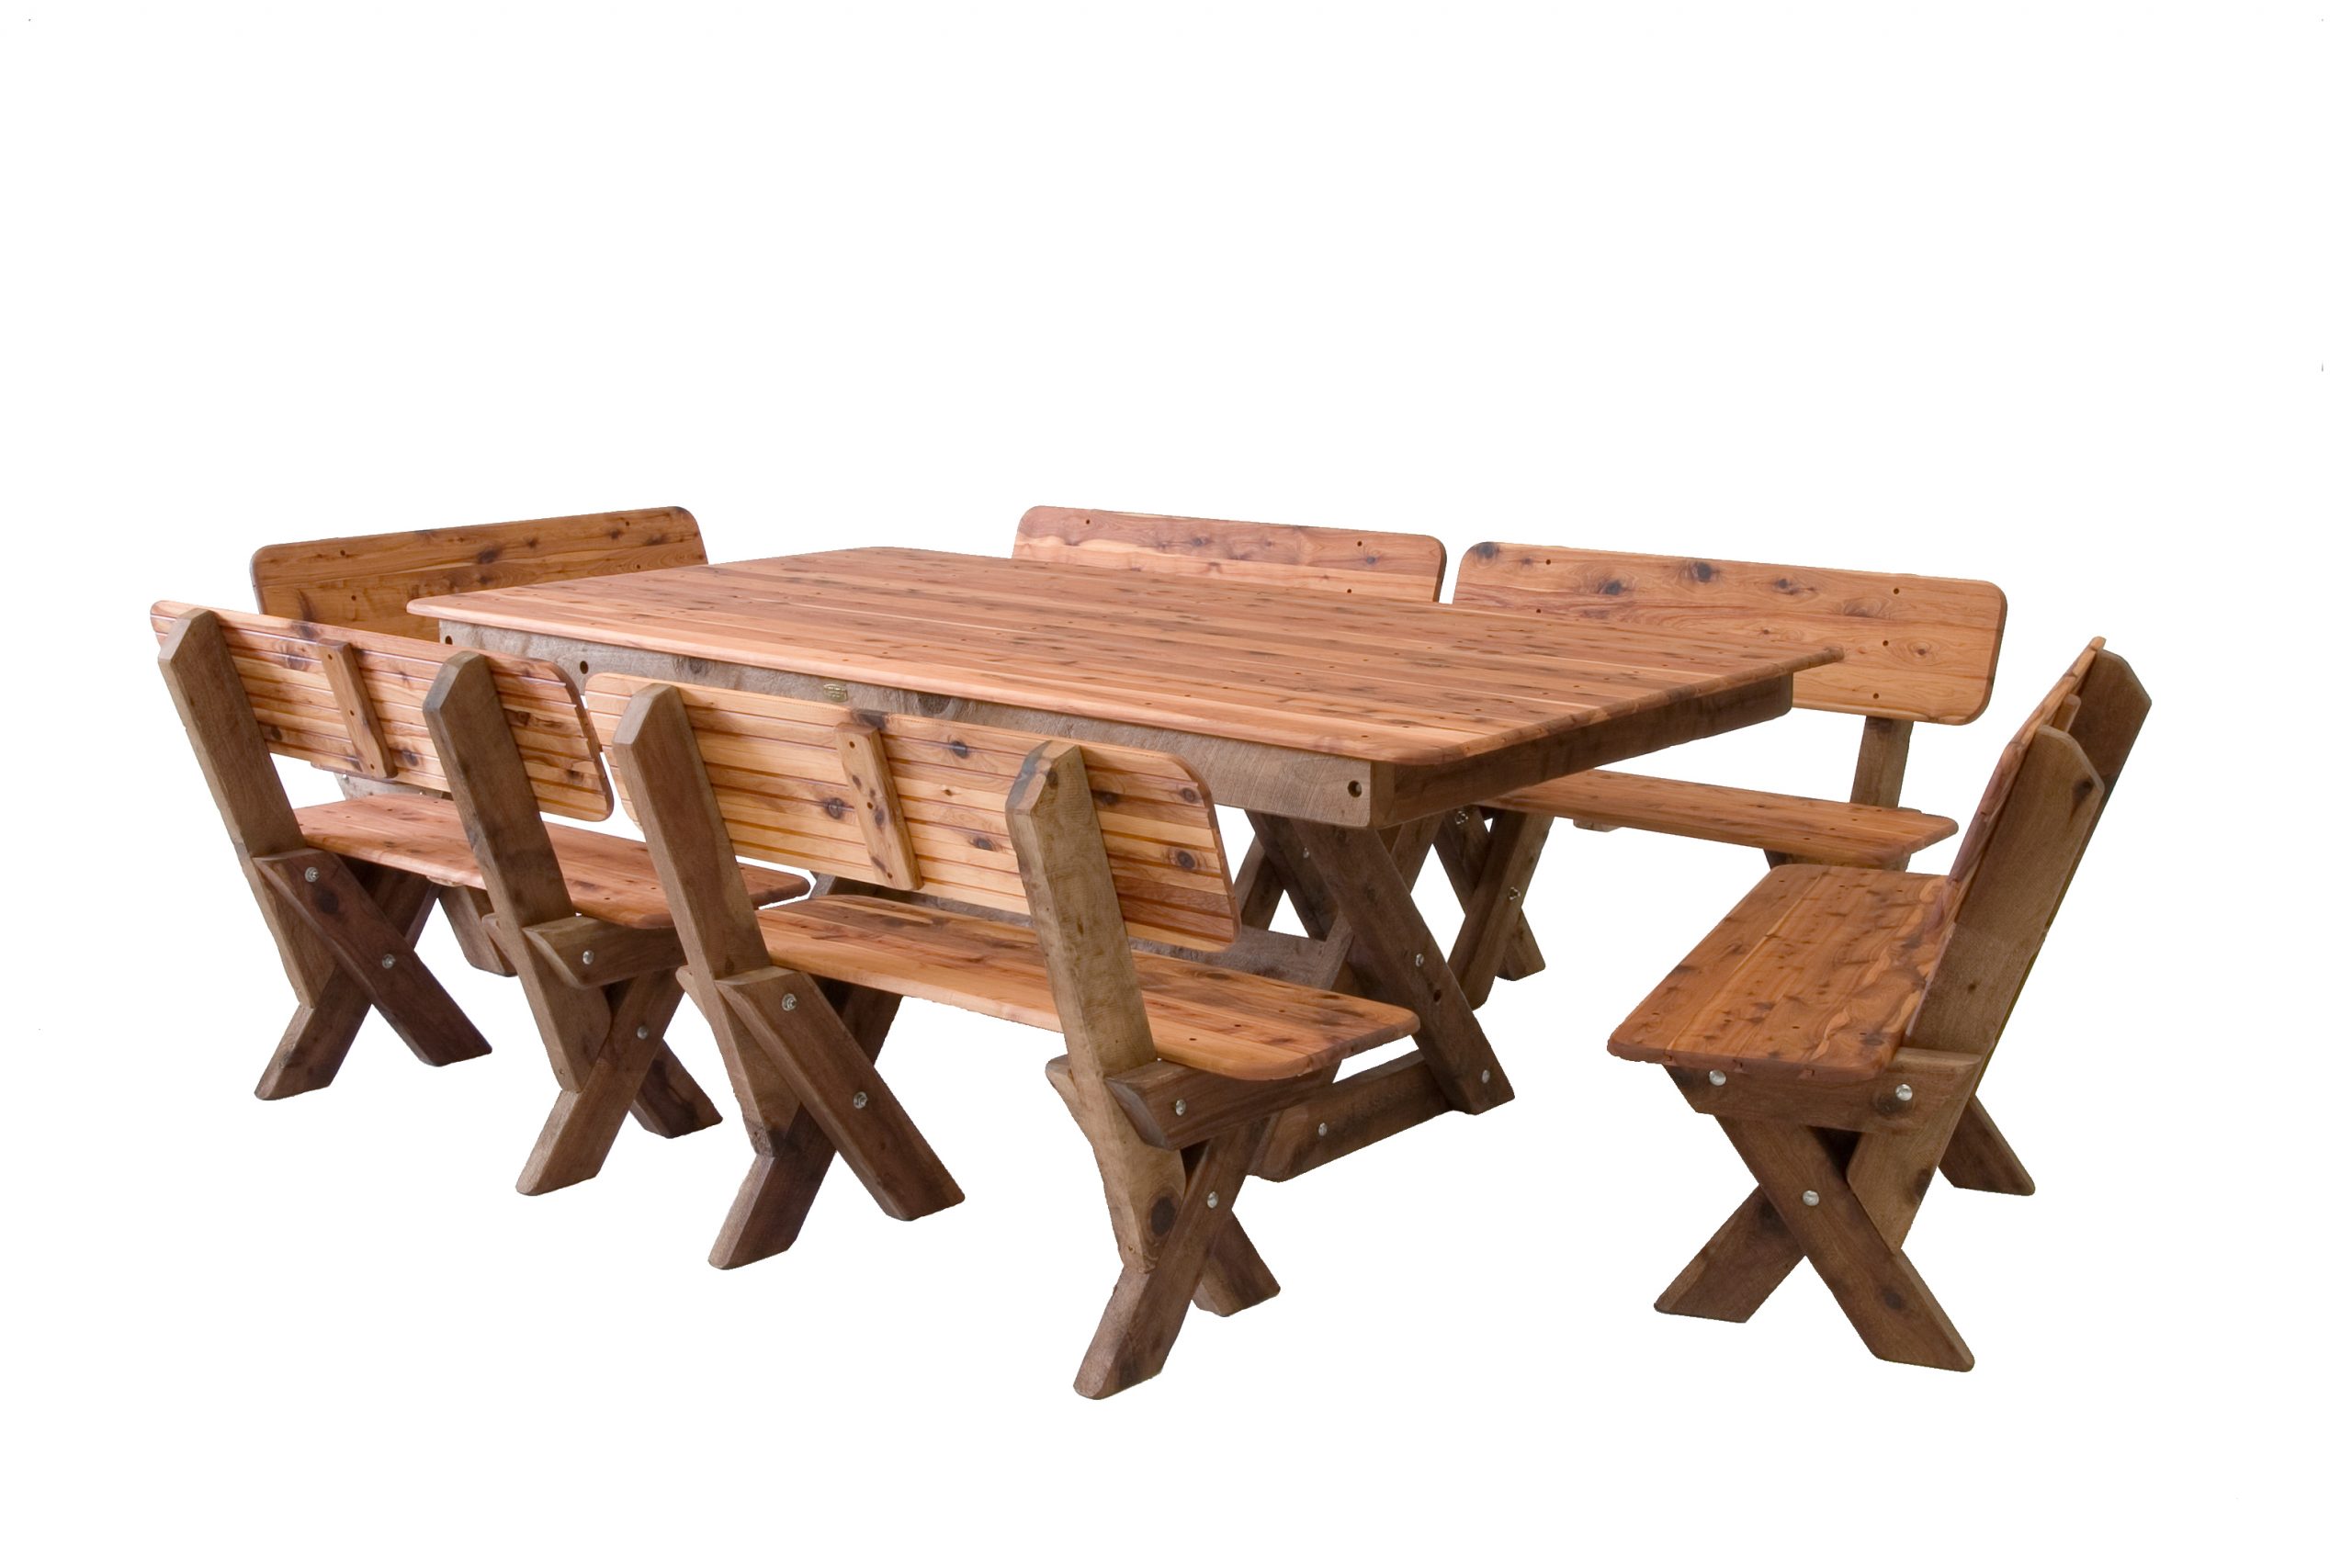 Yamba High Back Cypress Outdoor Timber Setting available to order now!